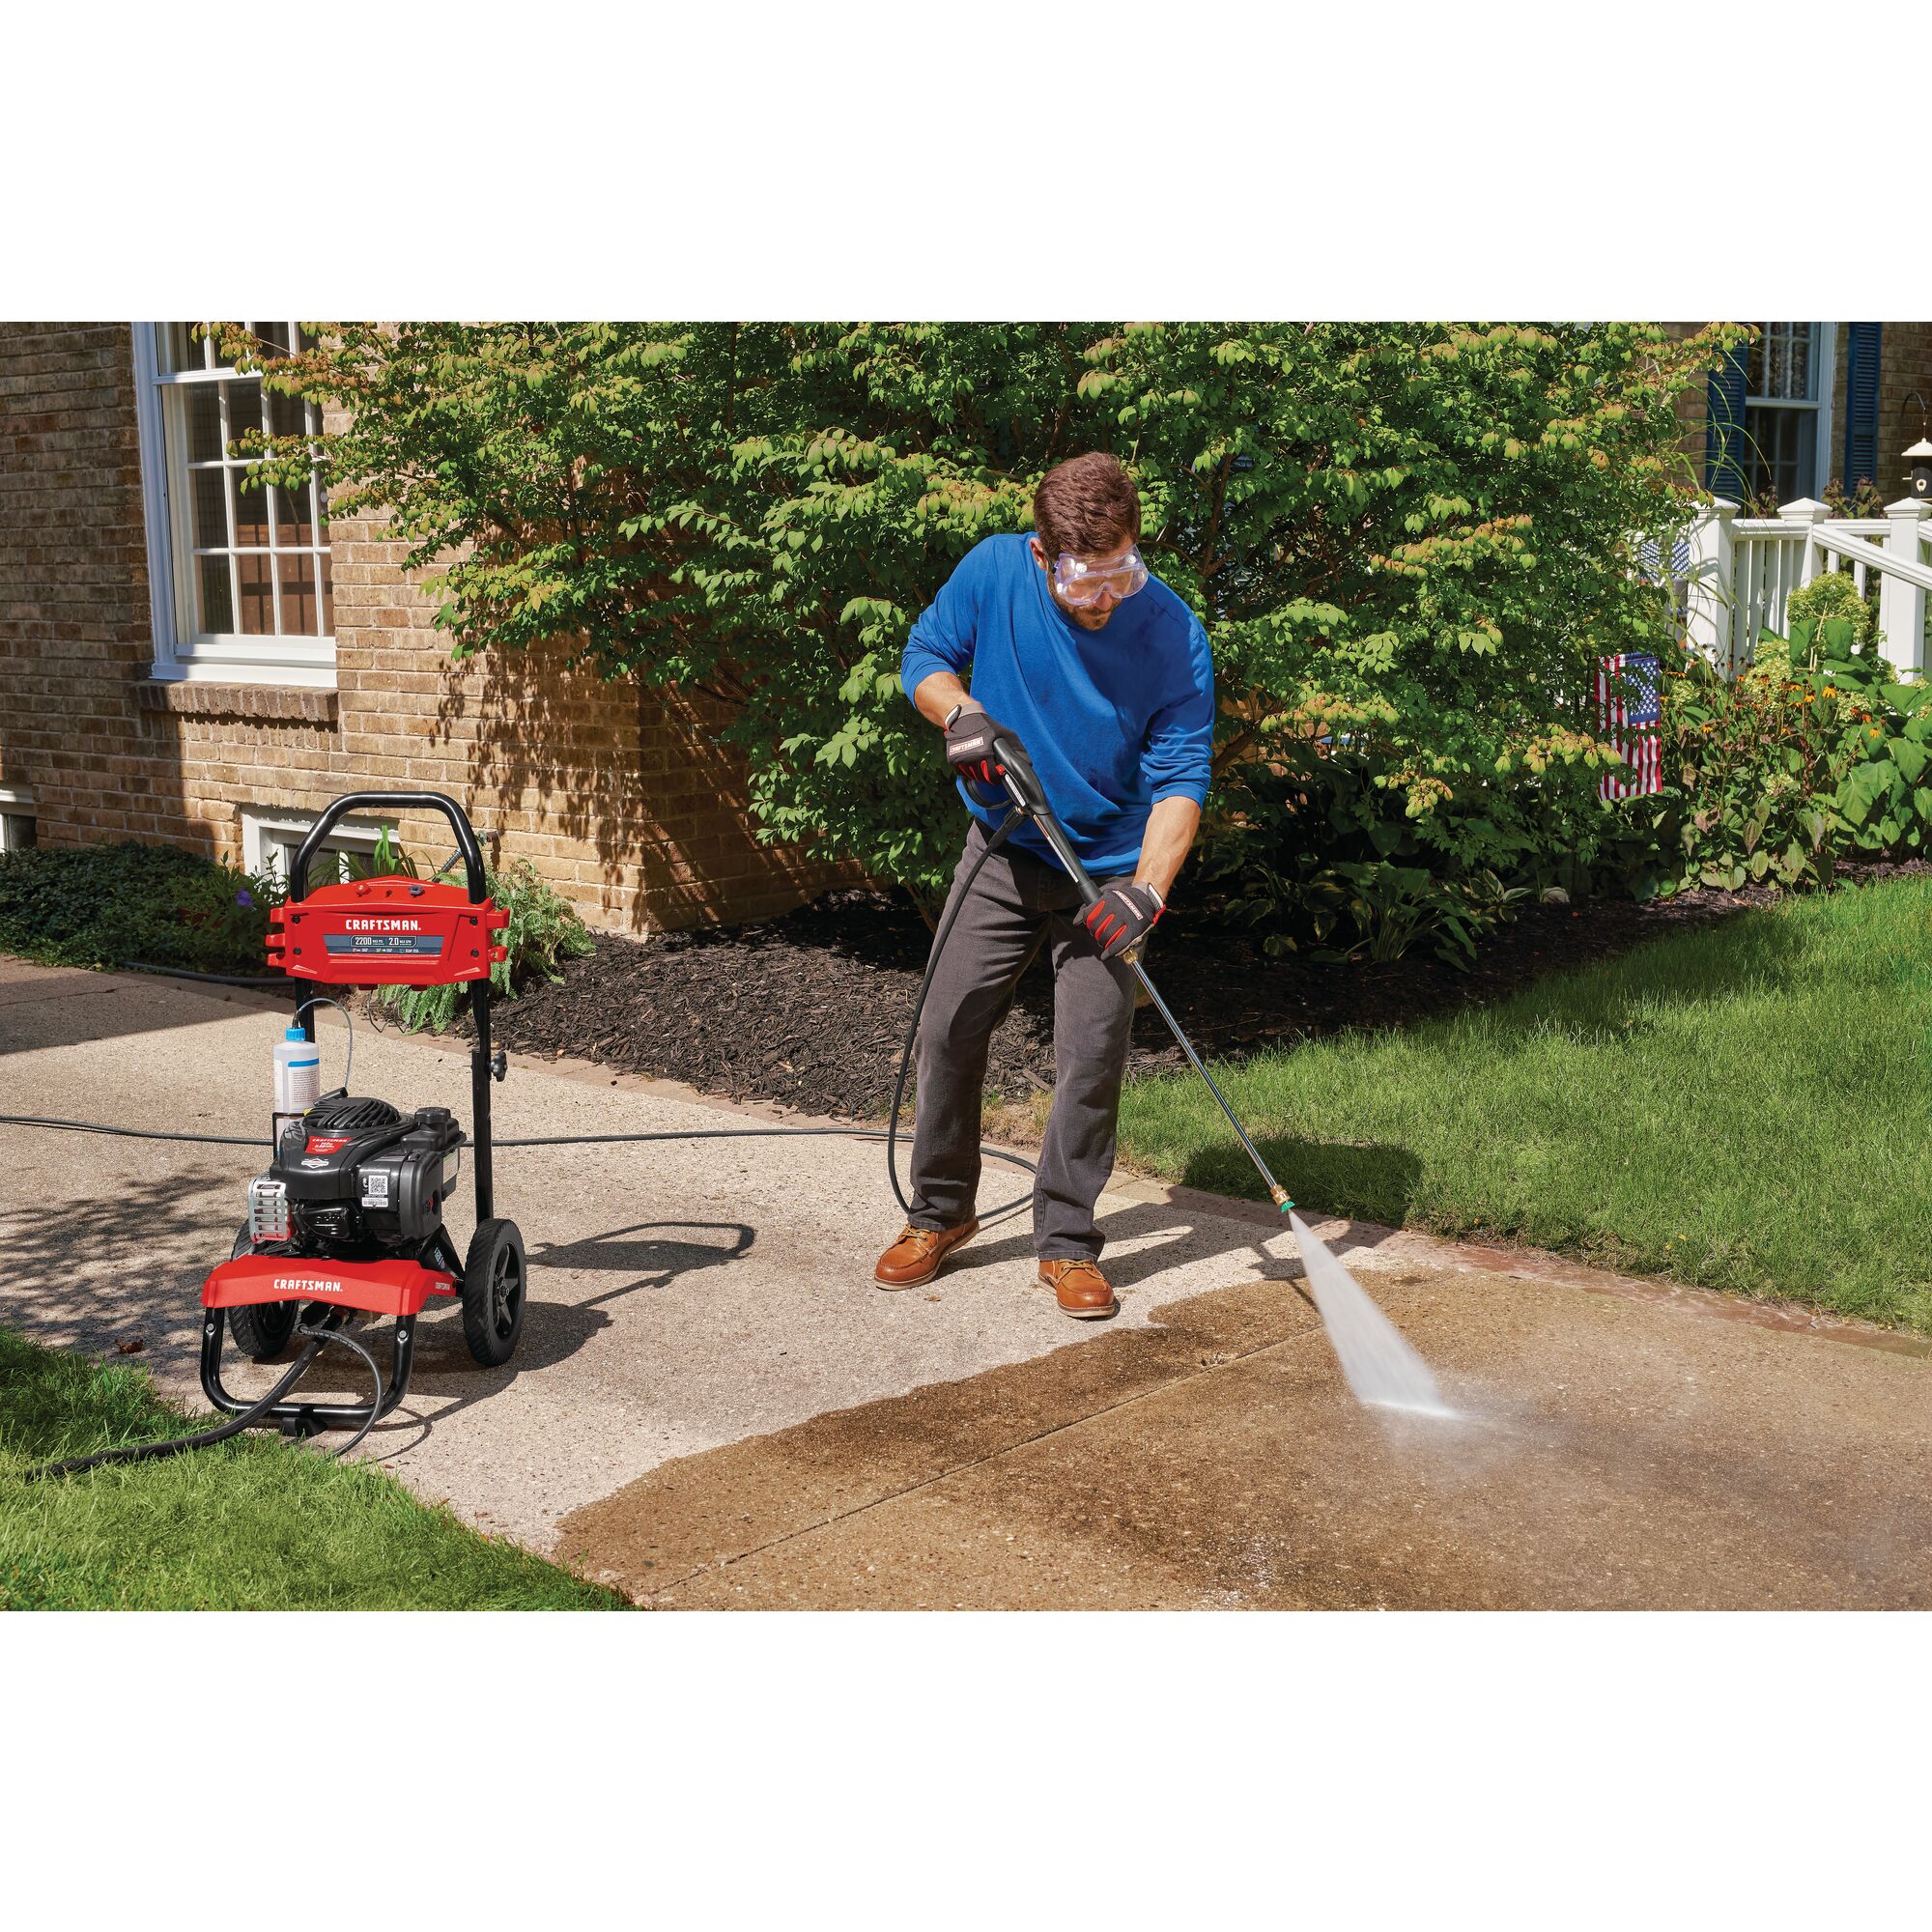 2200 MAX Pounds per Square Inch or 2 MAX Gallons Per Minute Pressure Washer being used by person to wash pavement in outdoor lawn.